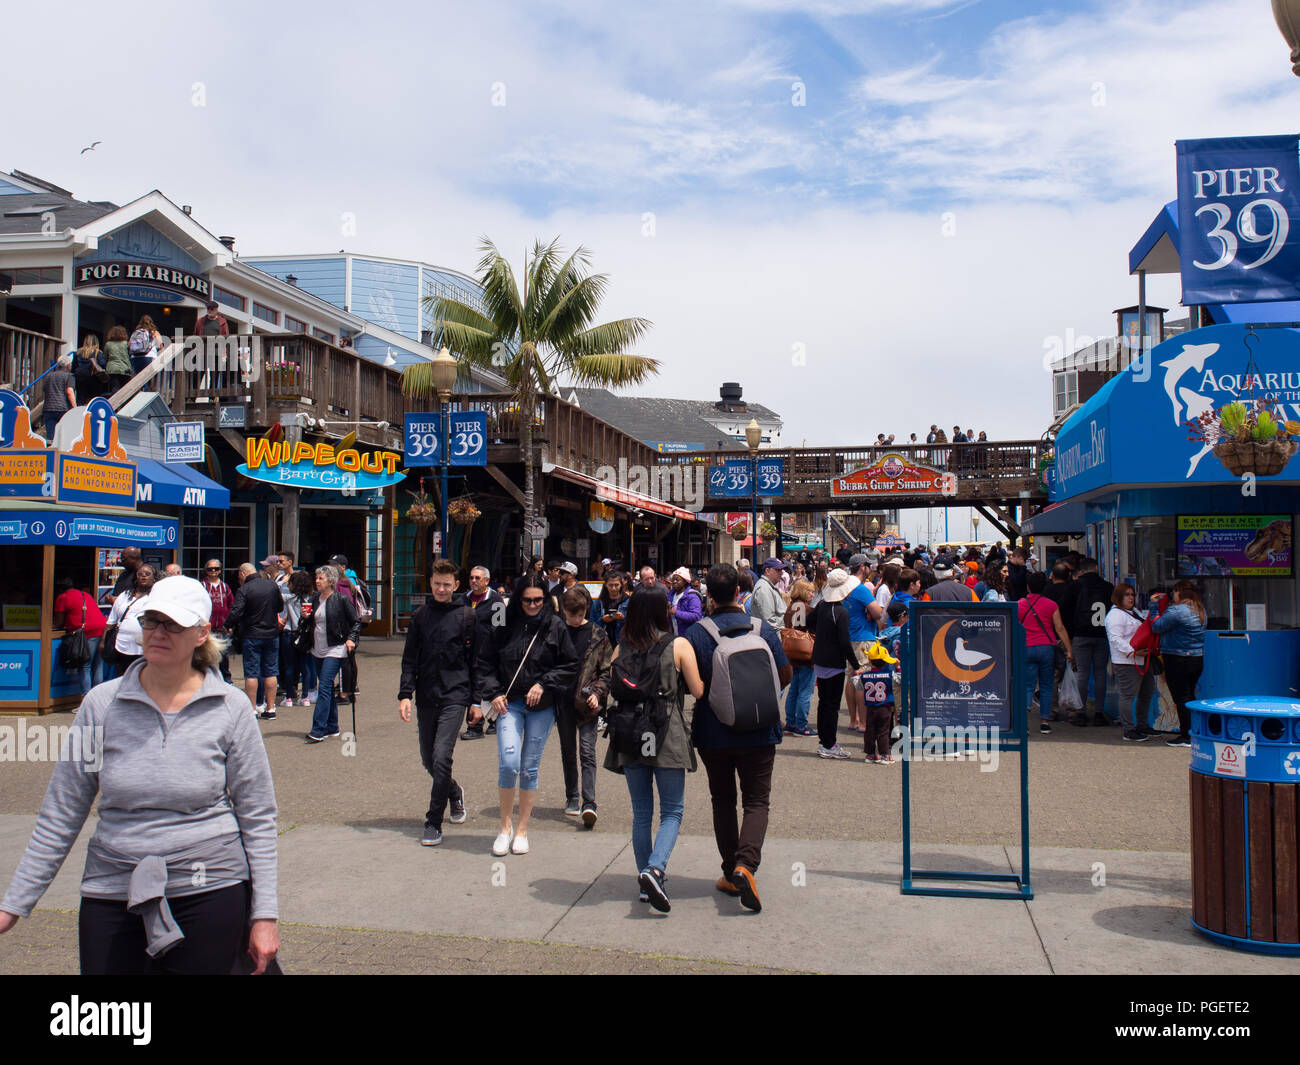 Crowd Of People At Pier 39 Fishermans Wharf Stock Photo